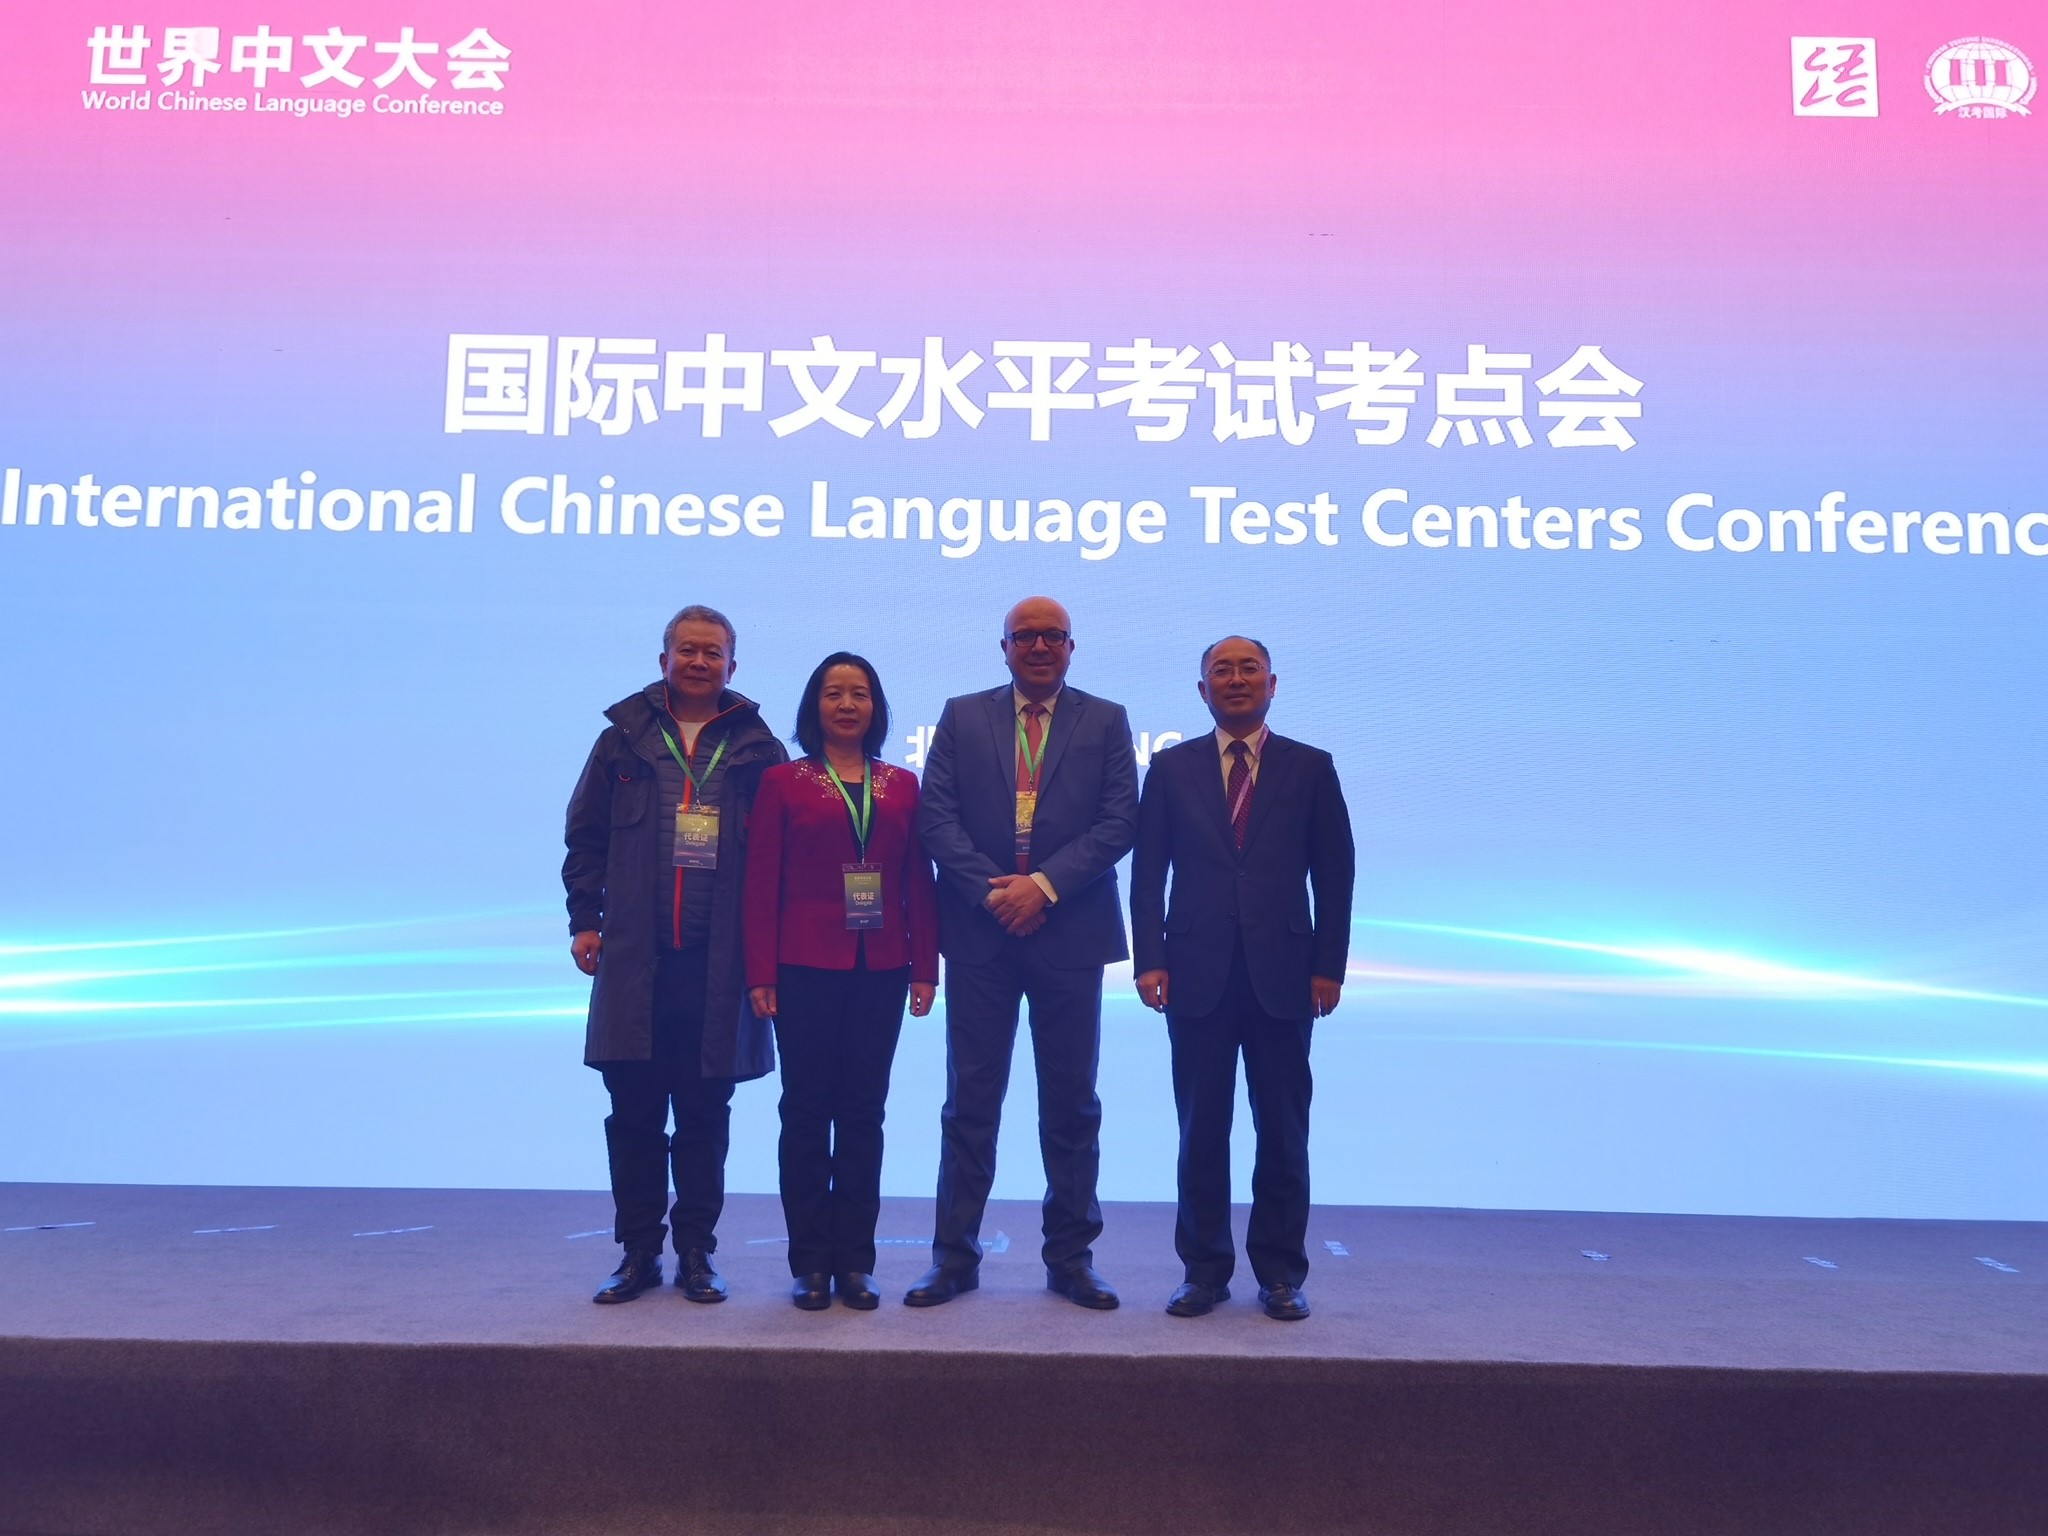 ‘Abu-Ghazaleh Confucius Institute’ Receives Excellence Award As One of the Best Test Center for Chinese Language in the World